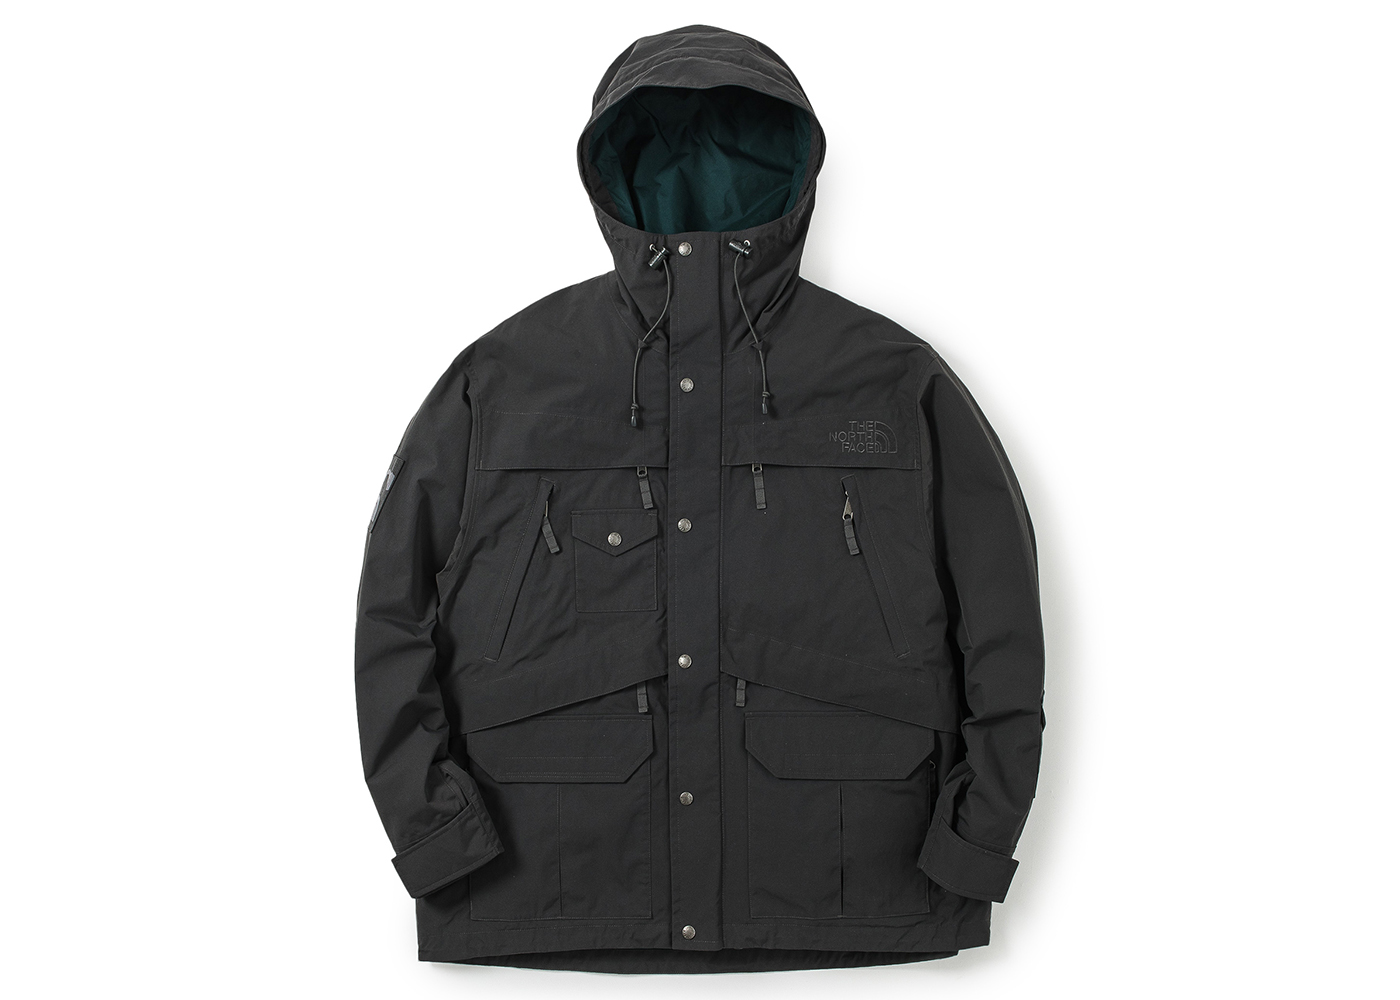 The North Face x Invincible Mountain Jacket Asphalt Grey メンズ 